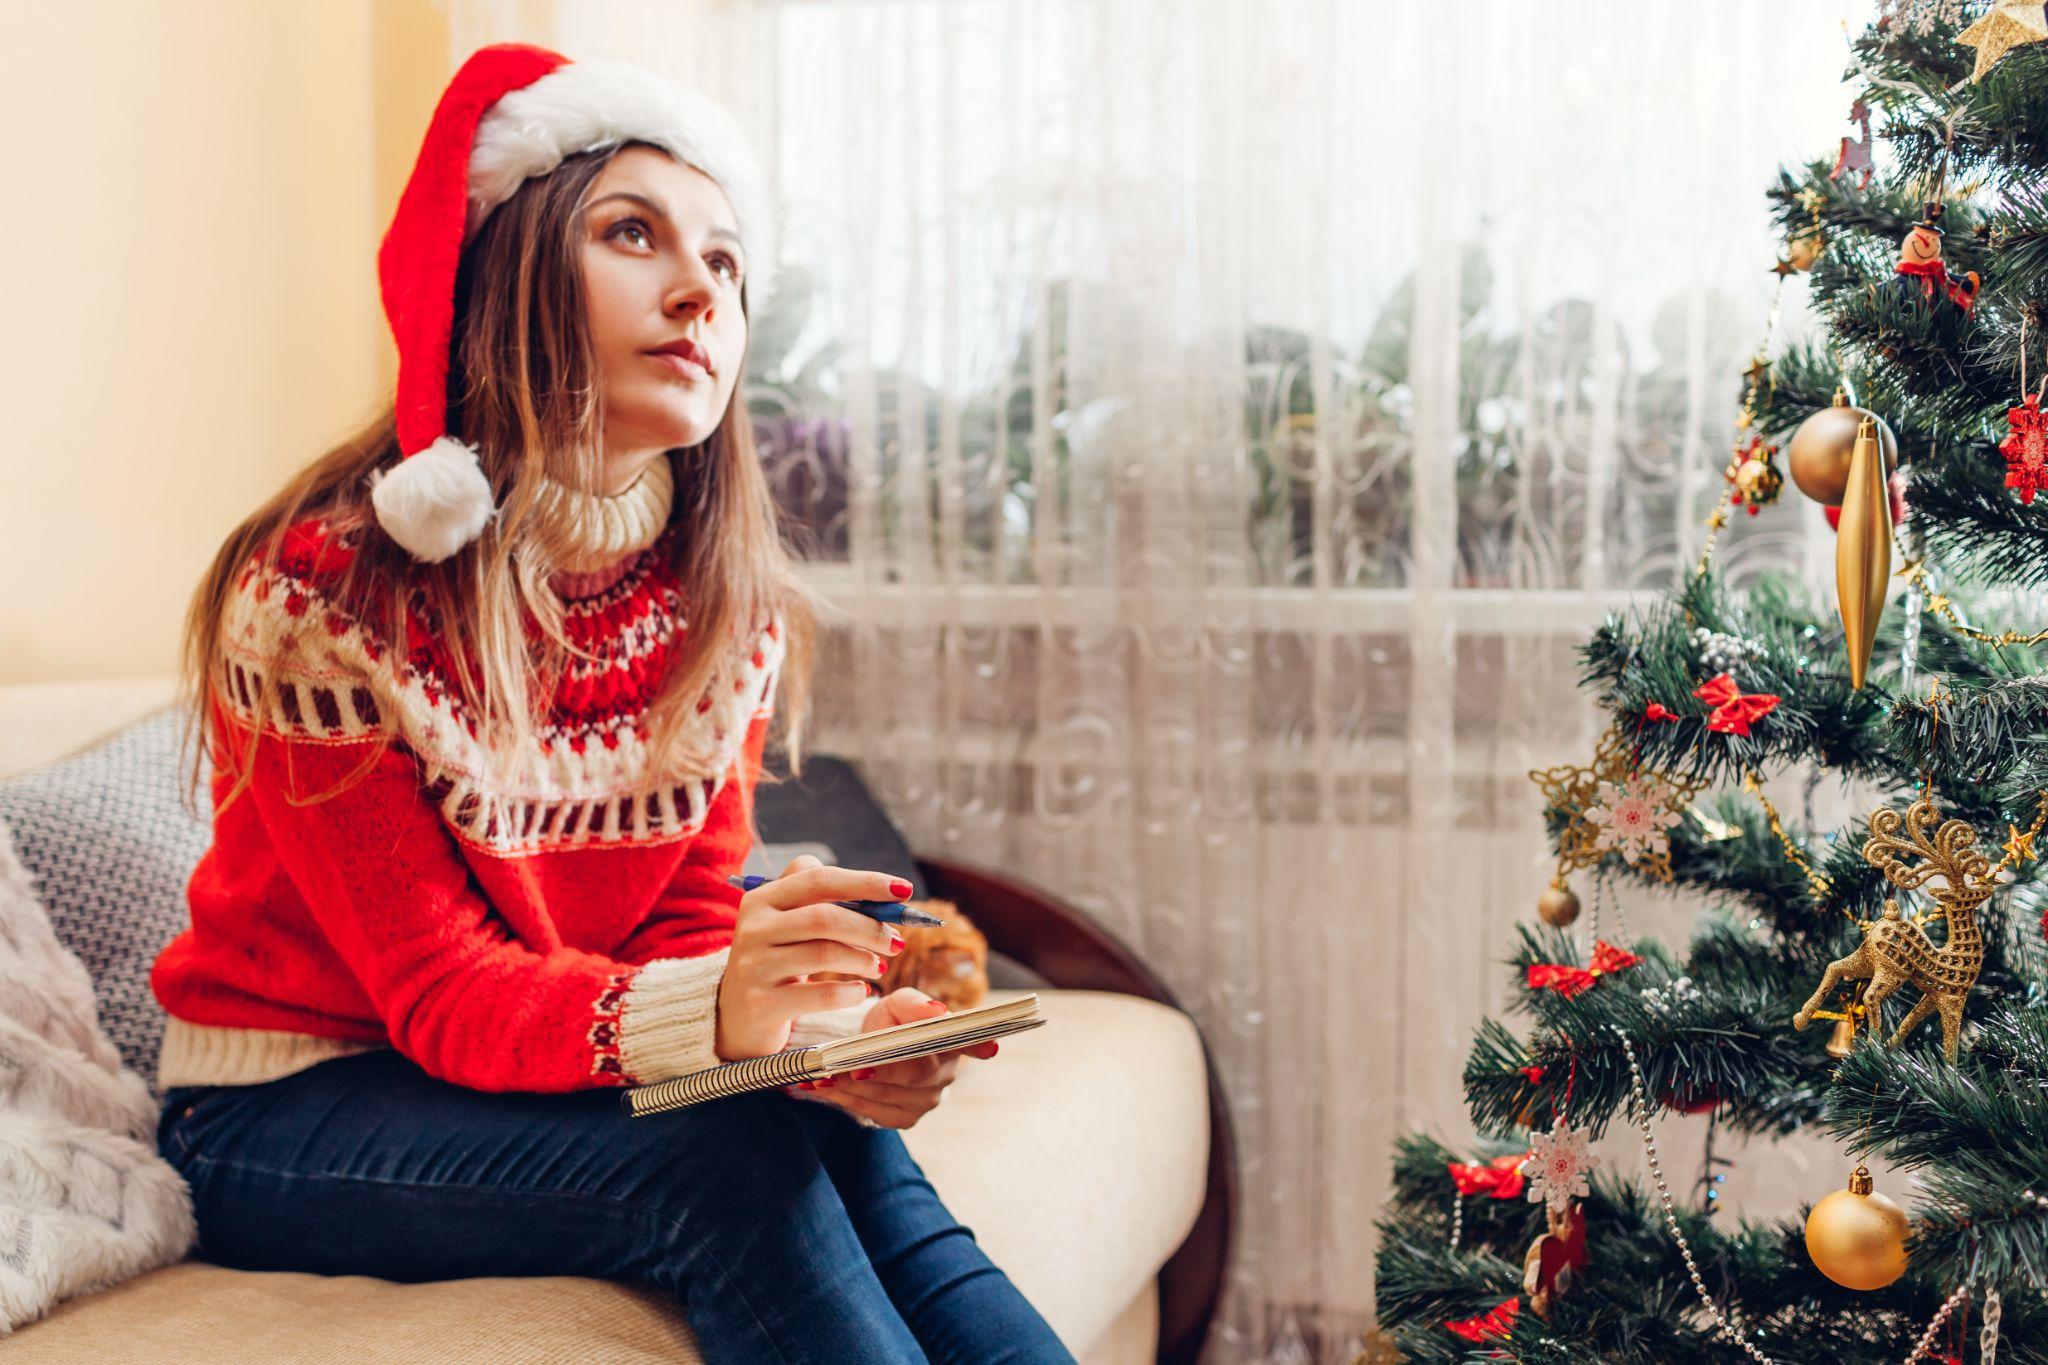 Young woman writing goals for New year in notebook at home sitting by Christmas tree in Santa hat.